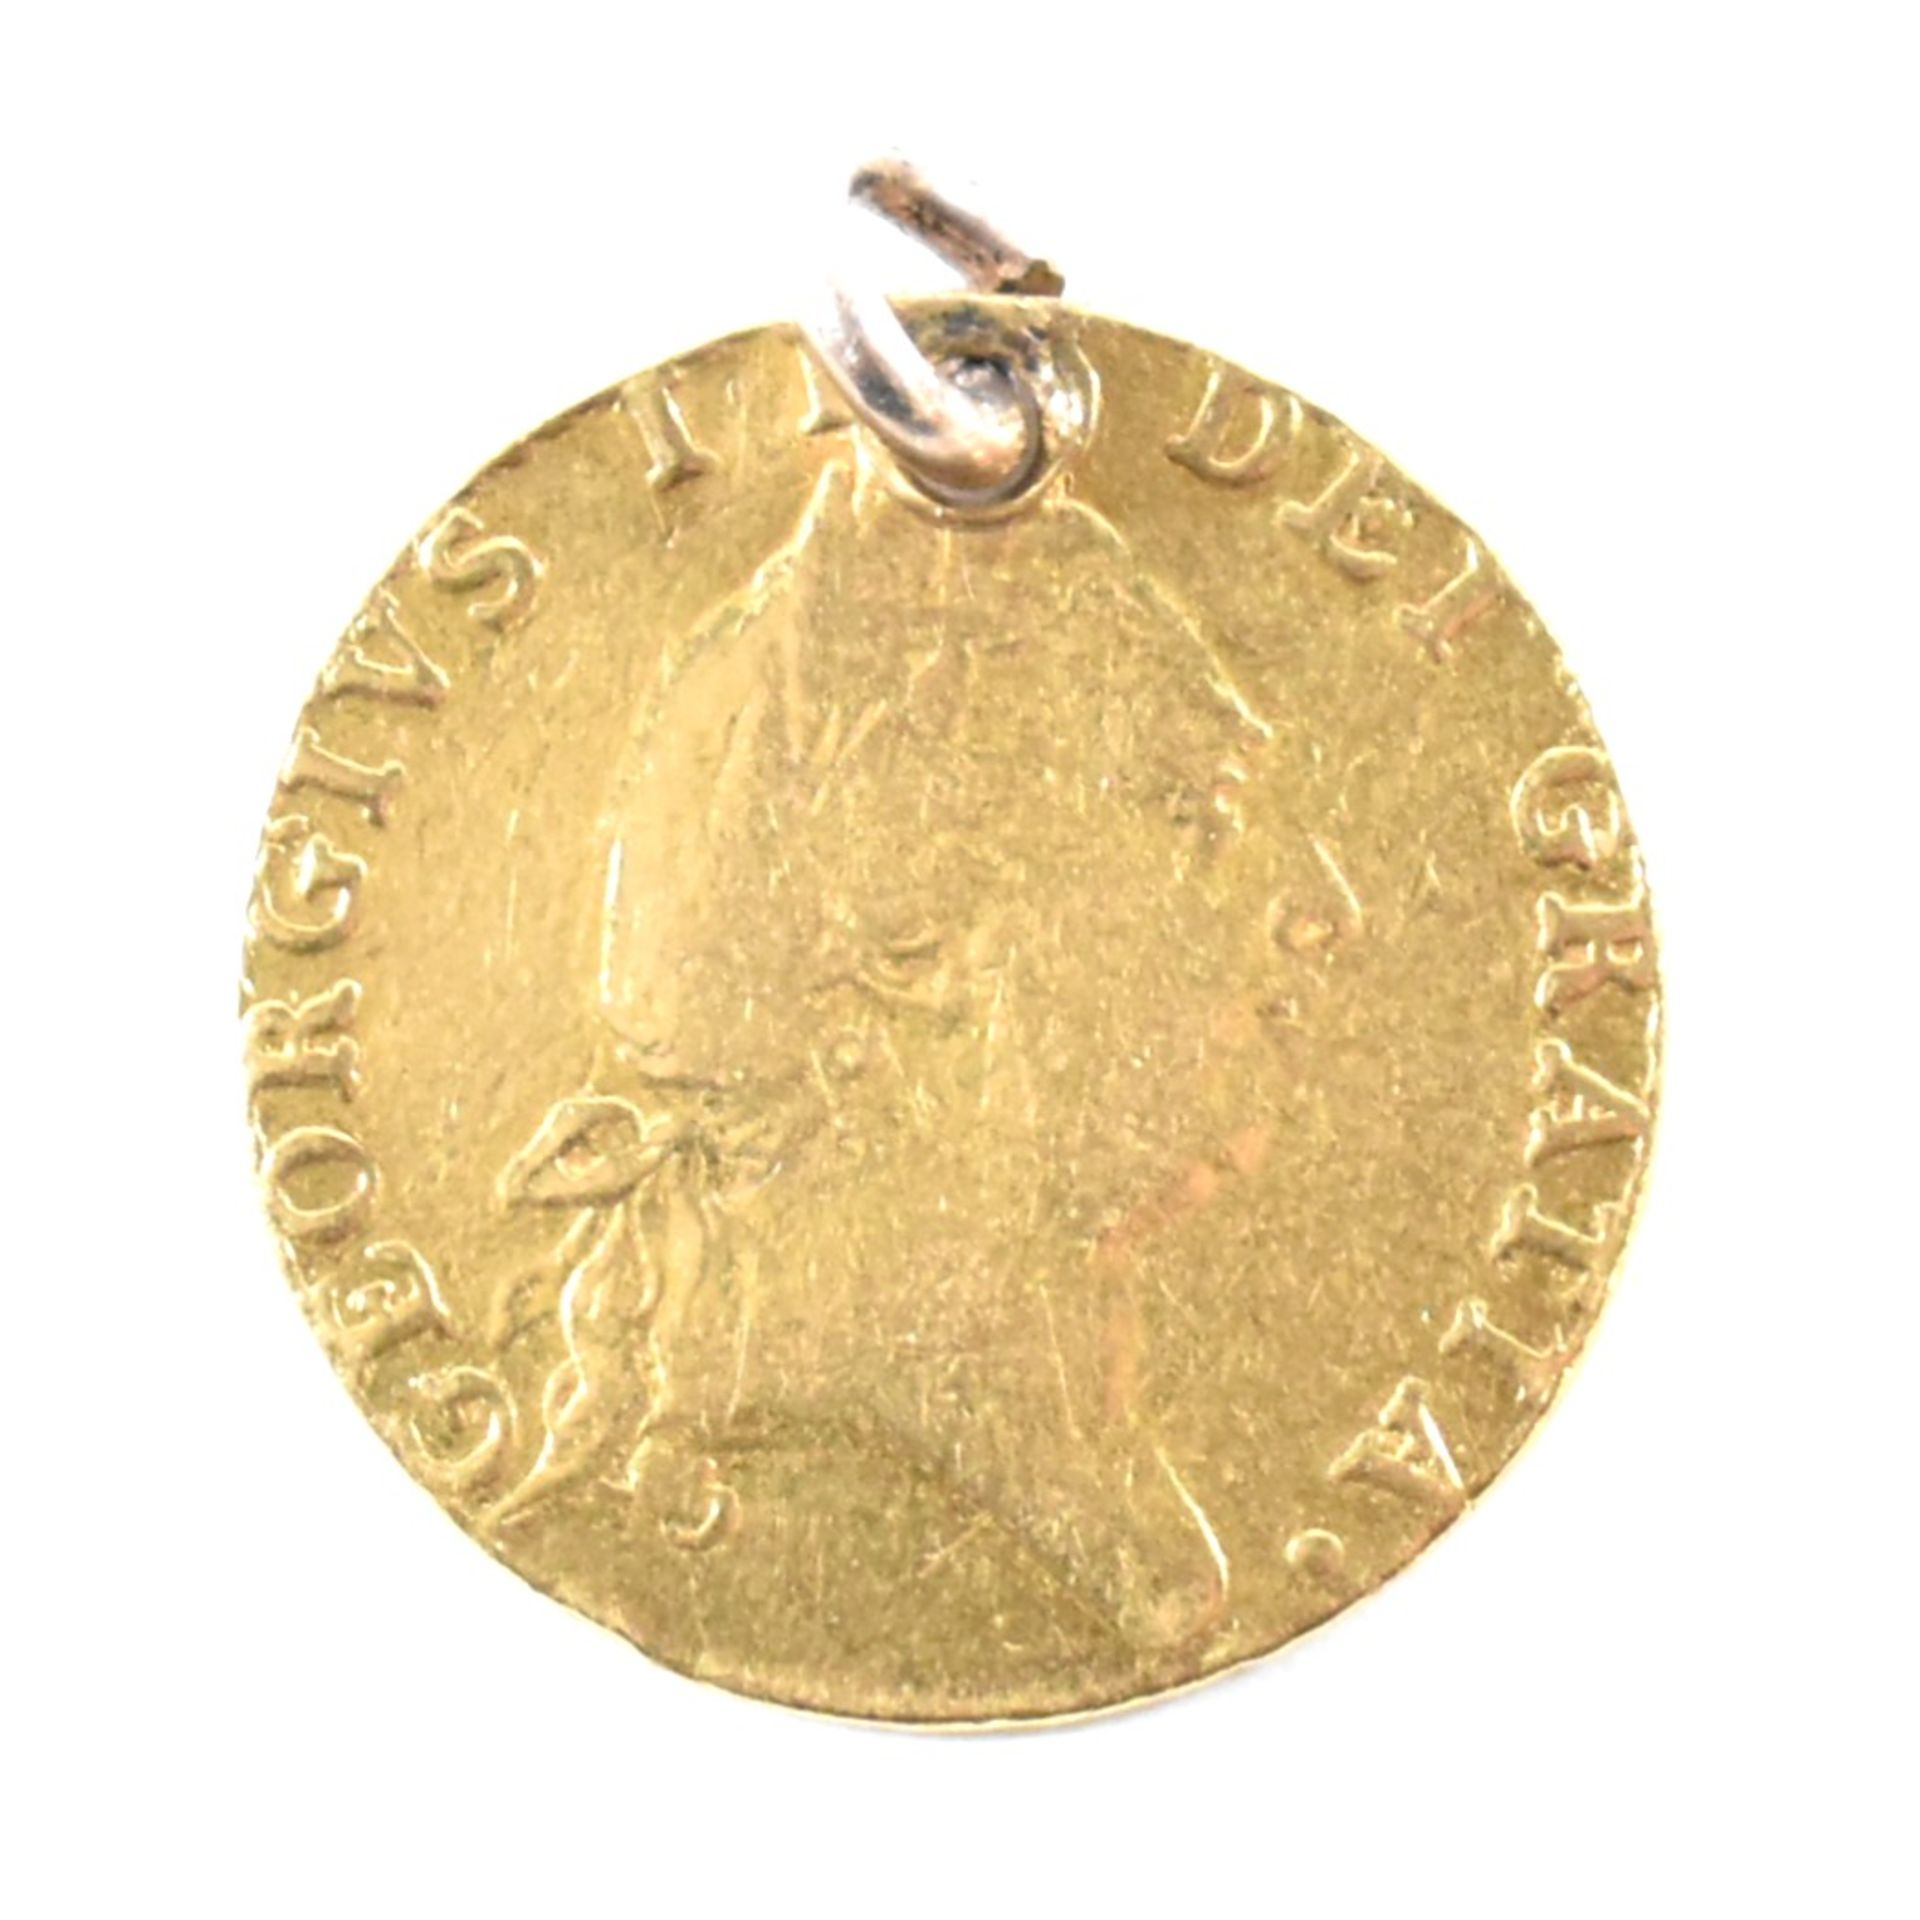 1787 GOLD GEORGE III GUINEA COIN - Image 2 of 4